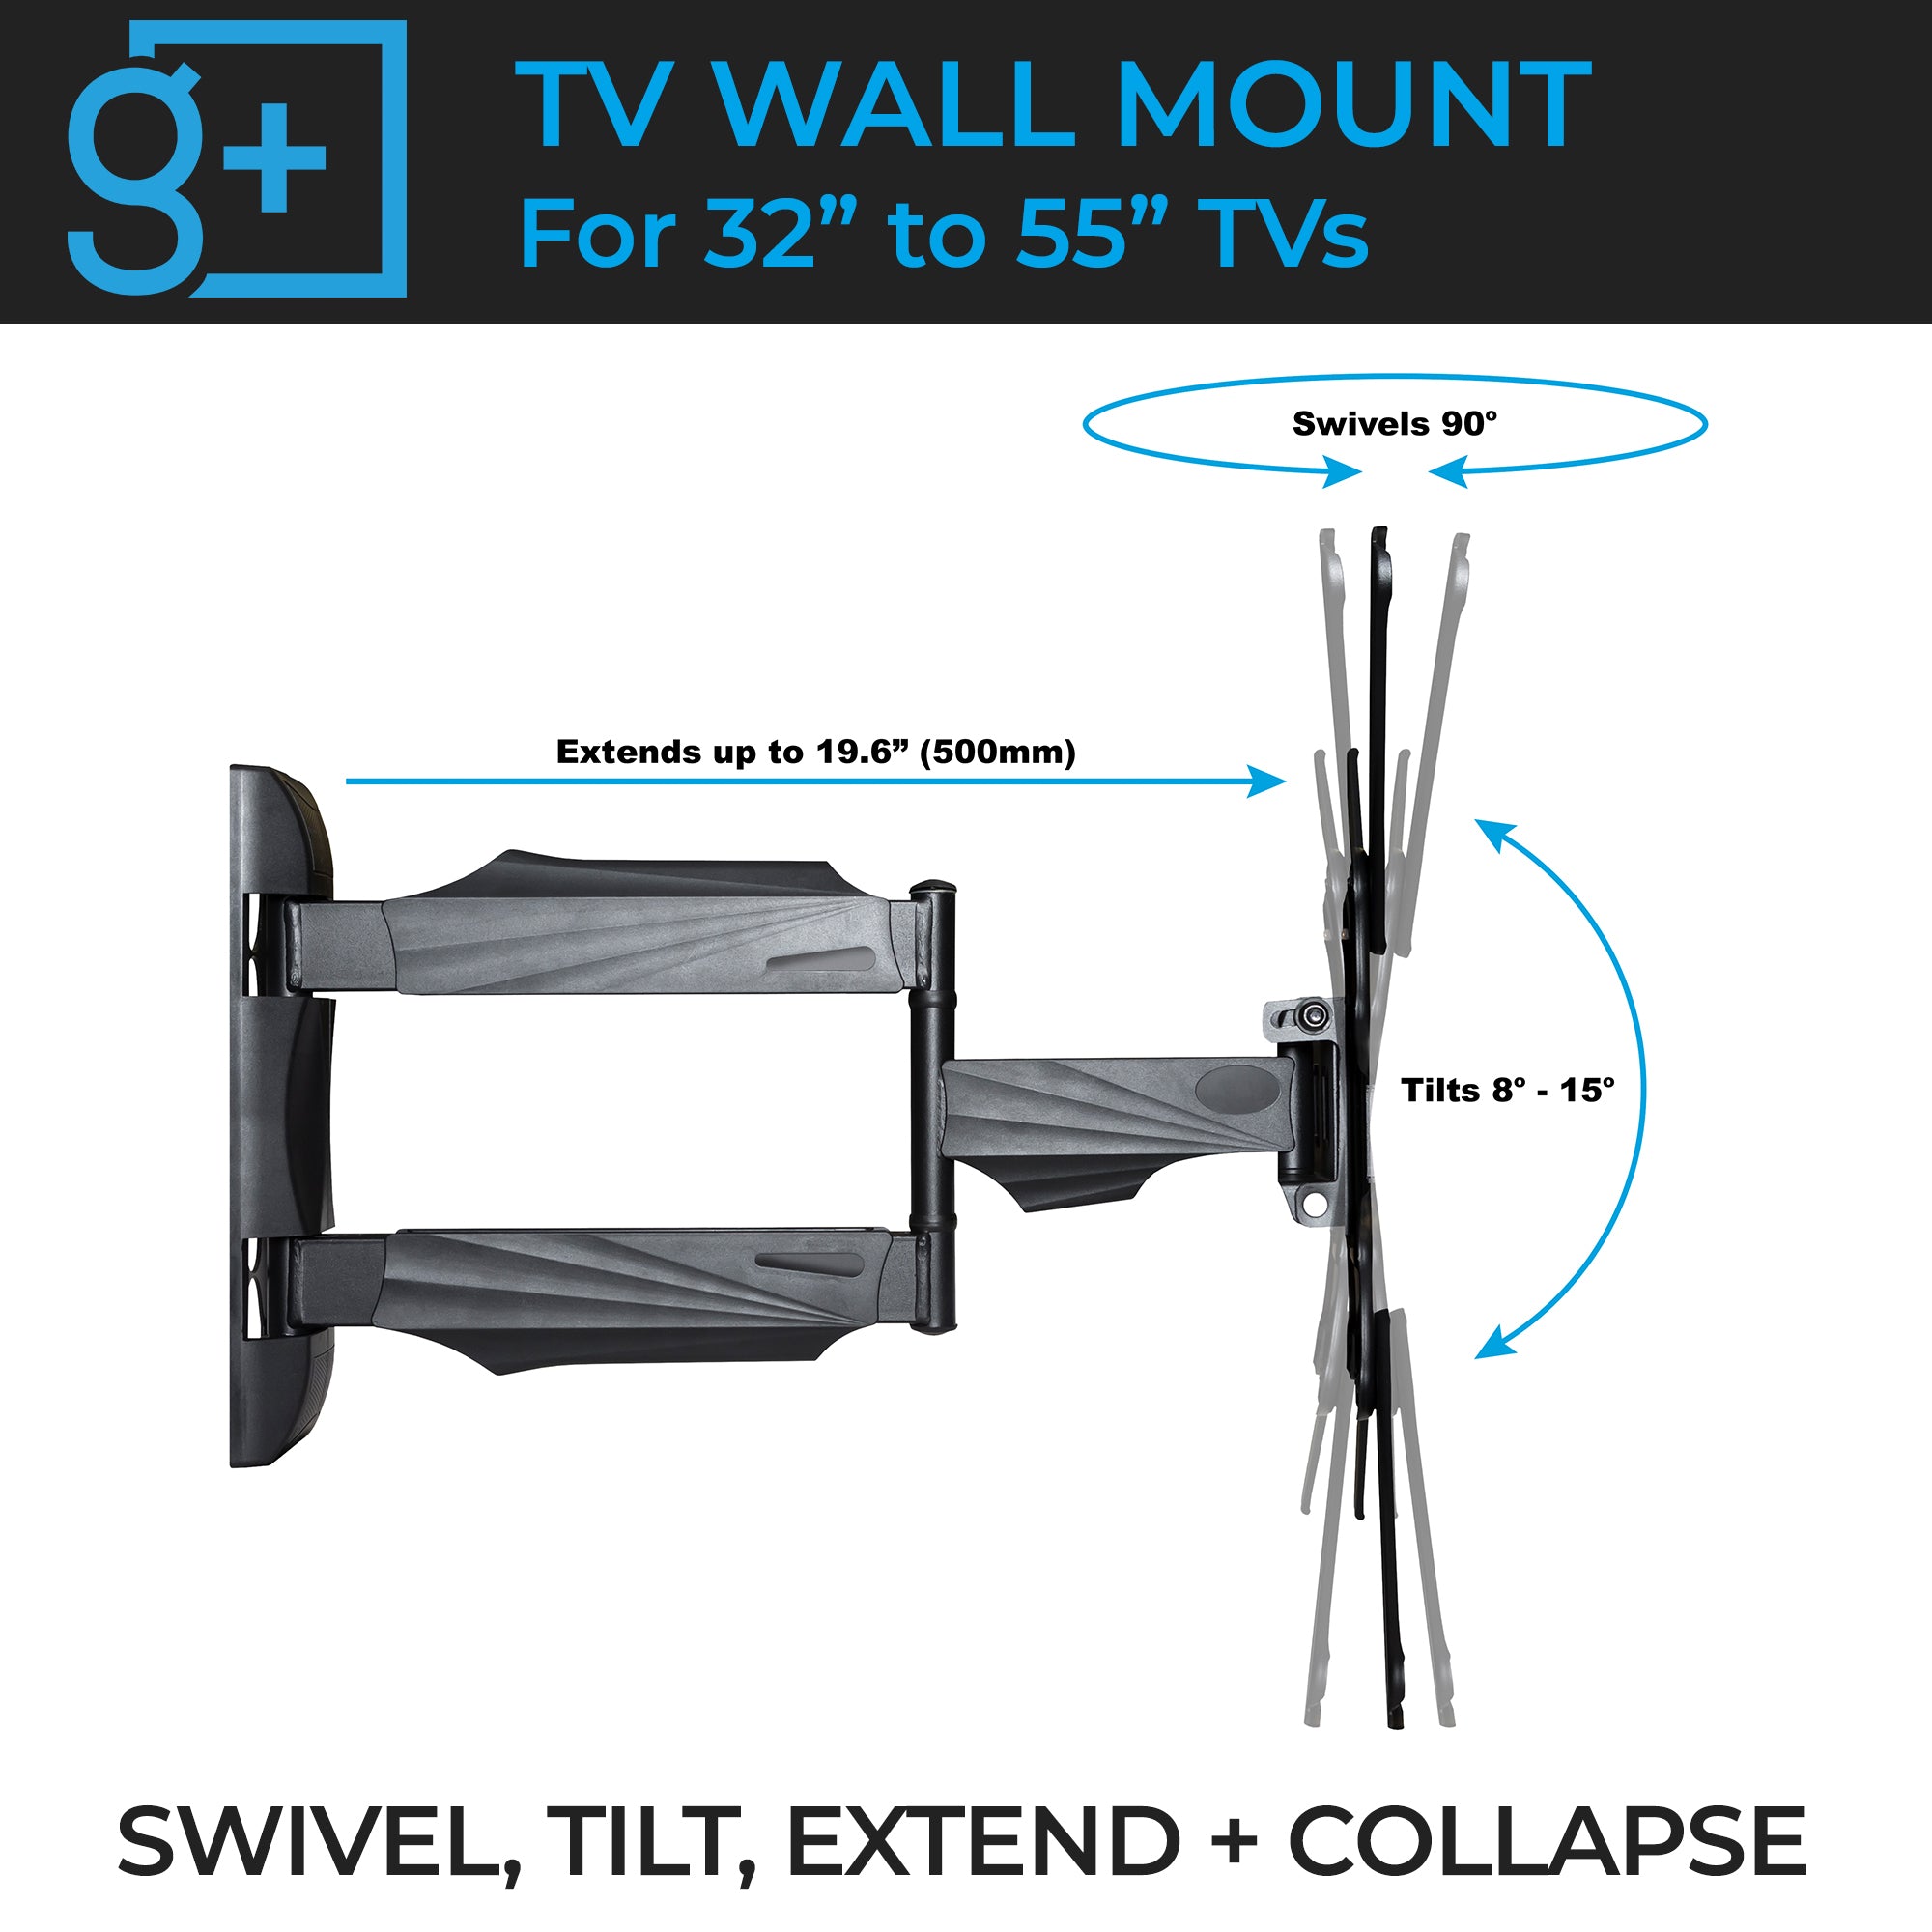 Gadgets+ TV wall mount swivels, tilts, extends and collapses flush against the wall. Works perfect as a corner TV mount or swivel TV mount.